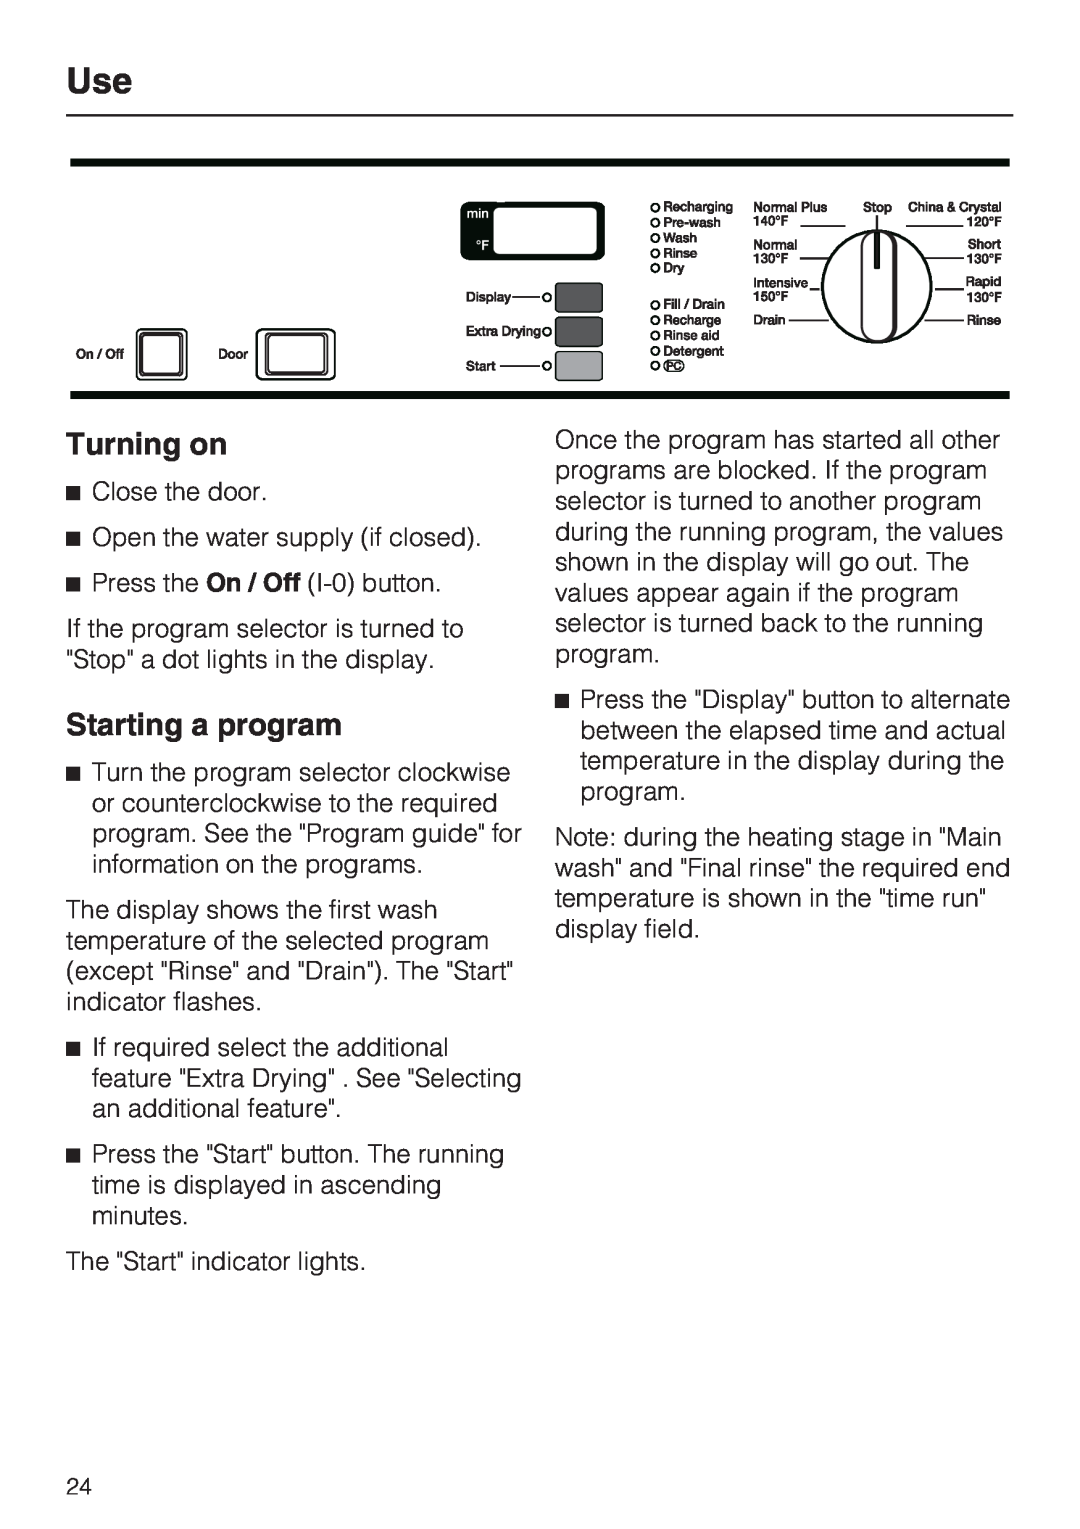 Miele G 7856, 06 868 521 installation instructions Turning on, Starting a program 